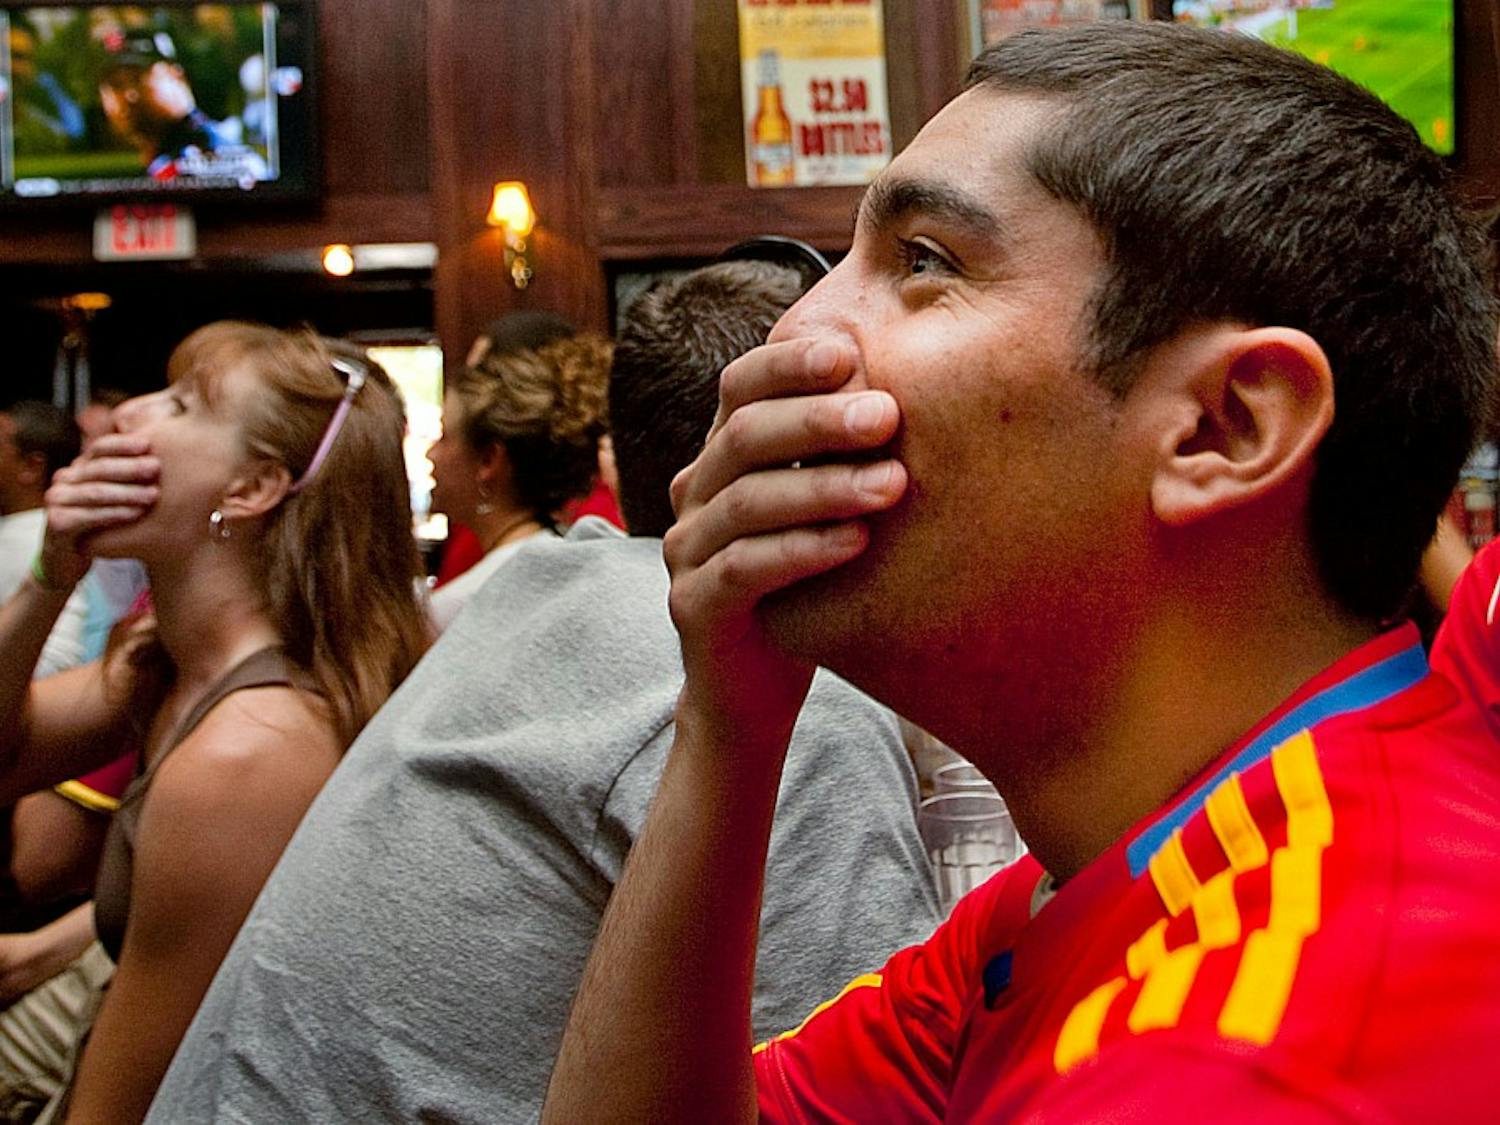 	Guillermo Trujillo anxiously watches the 2010 FIFA World Cup final between Spain and the Netherlands at Fox and Hound Pub and Grille on July 11. The Spaniards were victorious over the Dutch in extra time, 1-0.